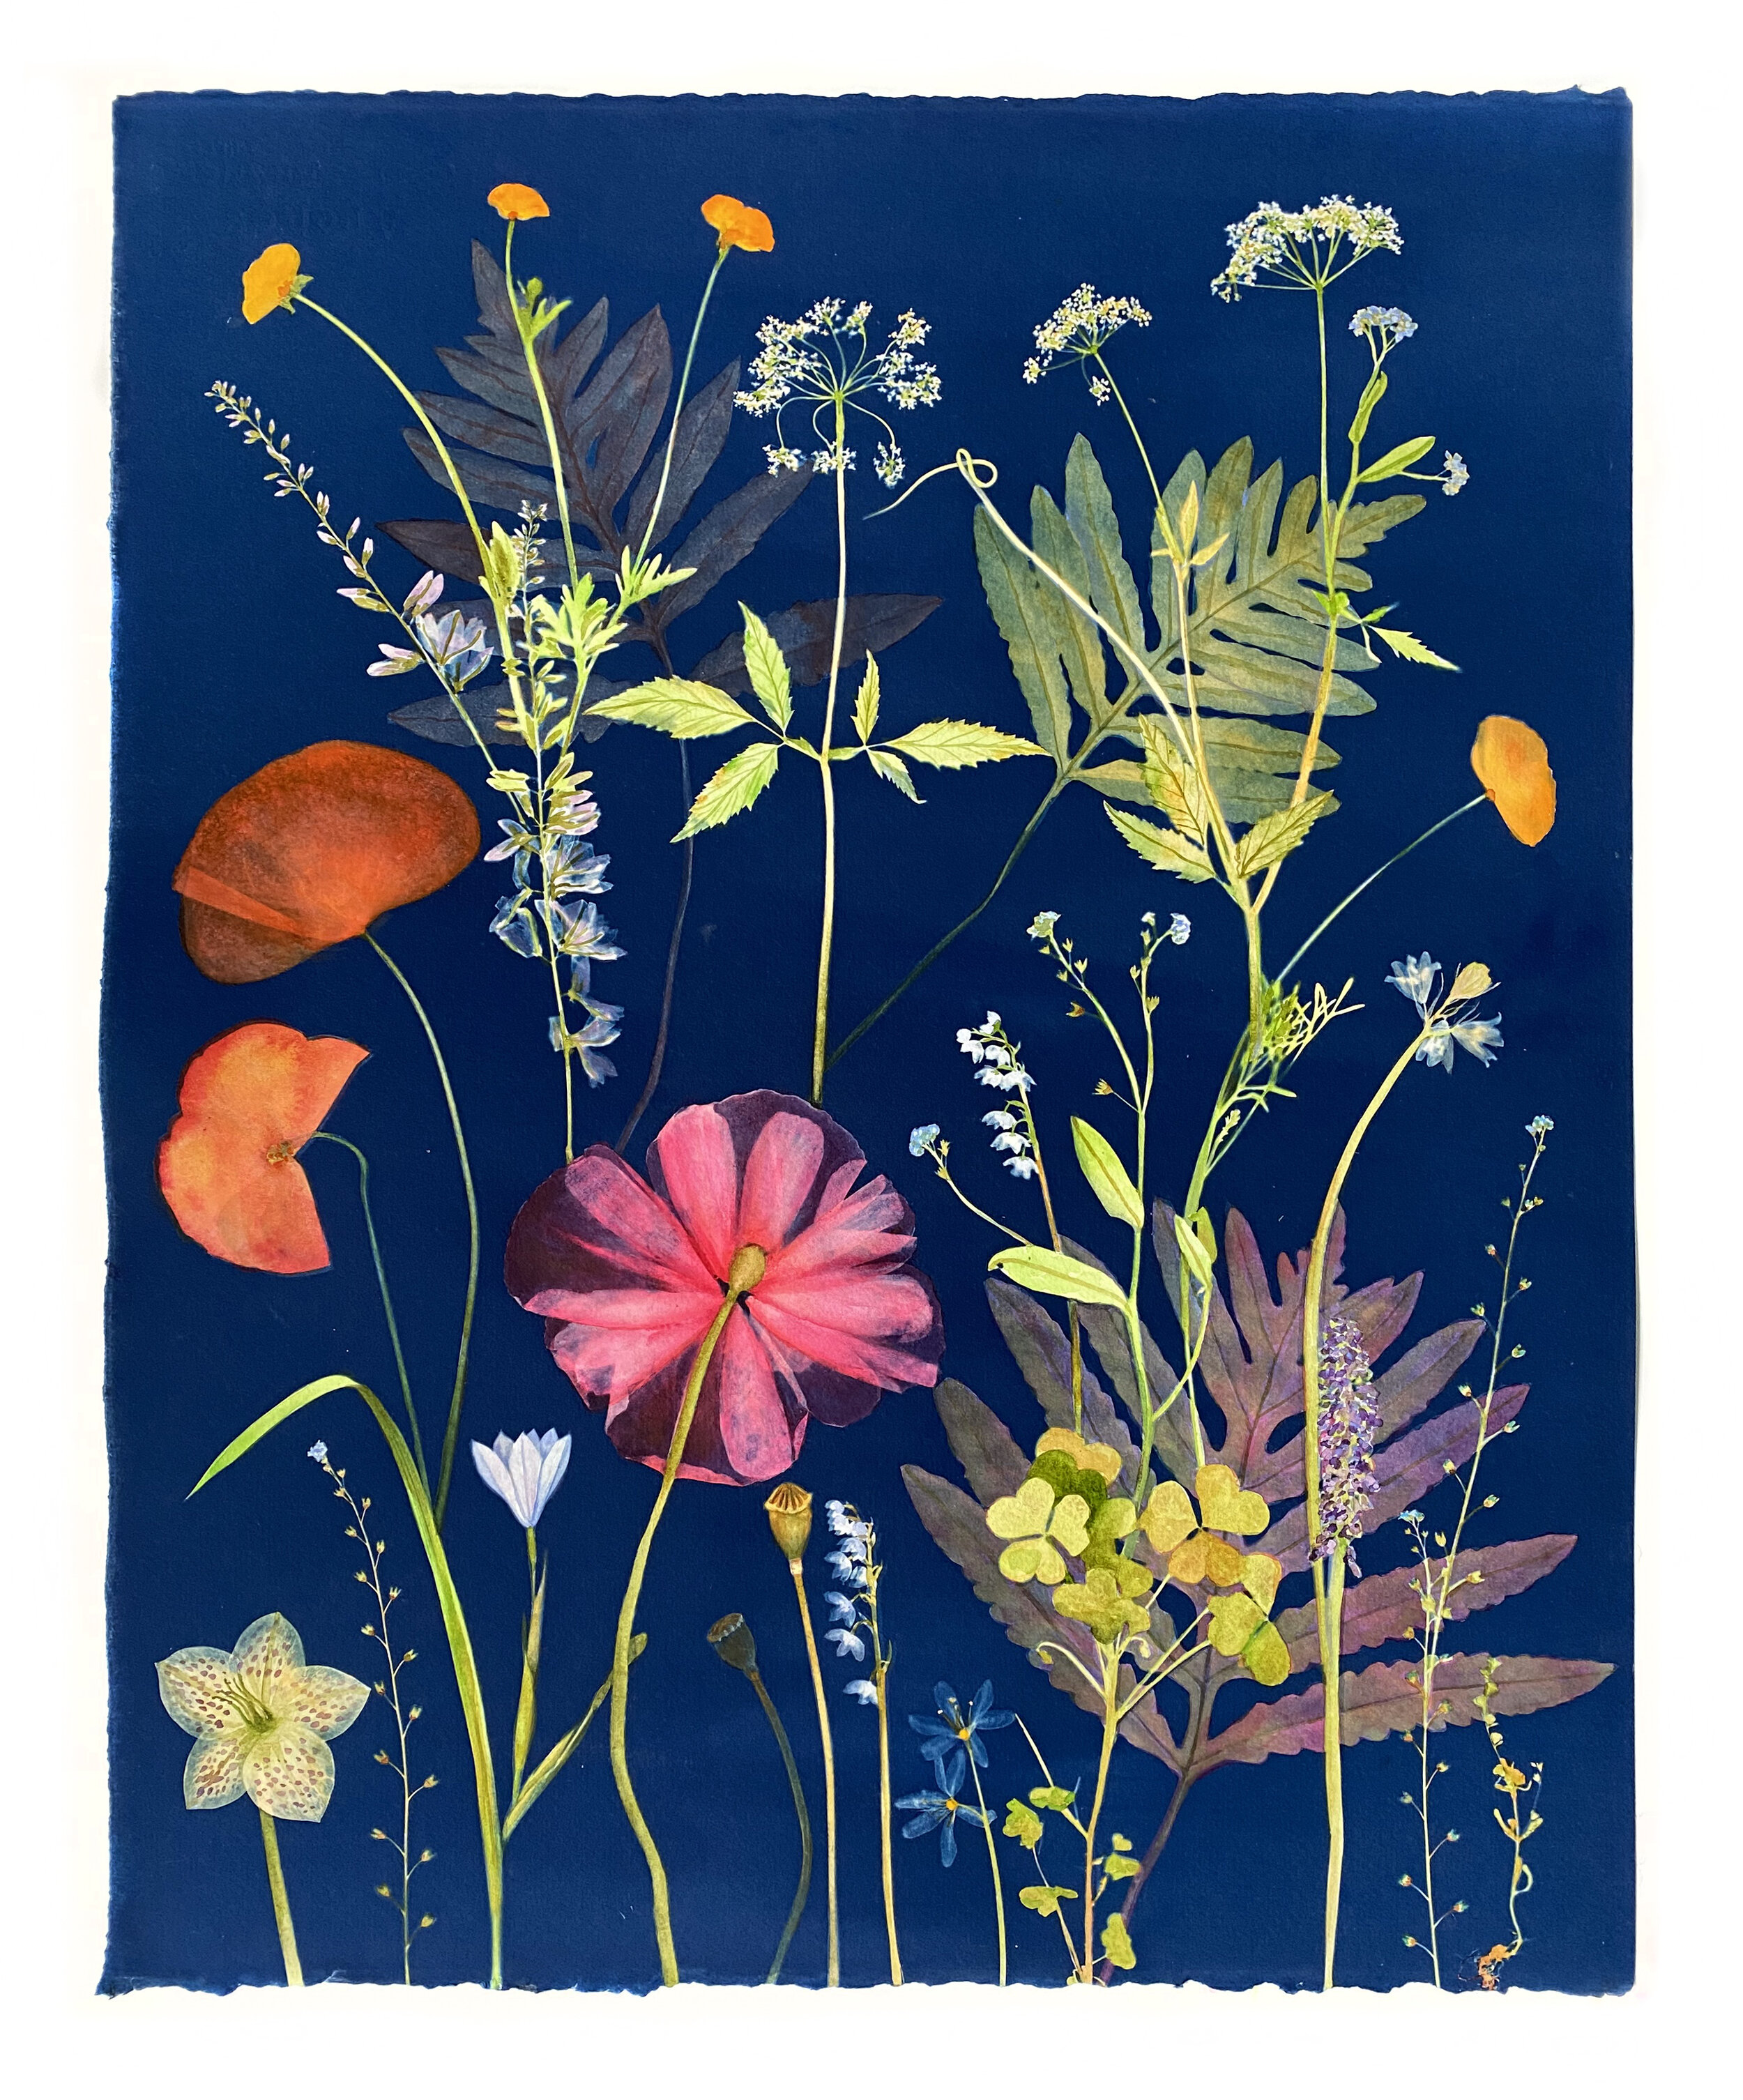 Cyanotype Painting (Poppies, Queen Anne's Lace, Clover, Ferns, etc) 